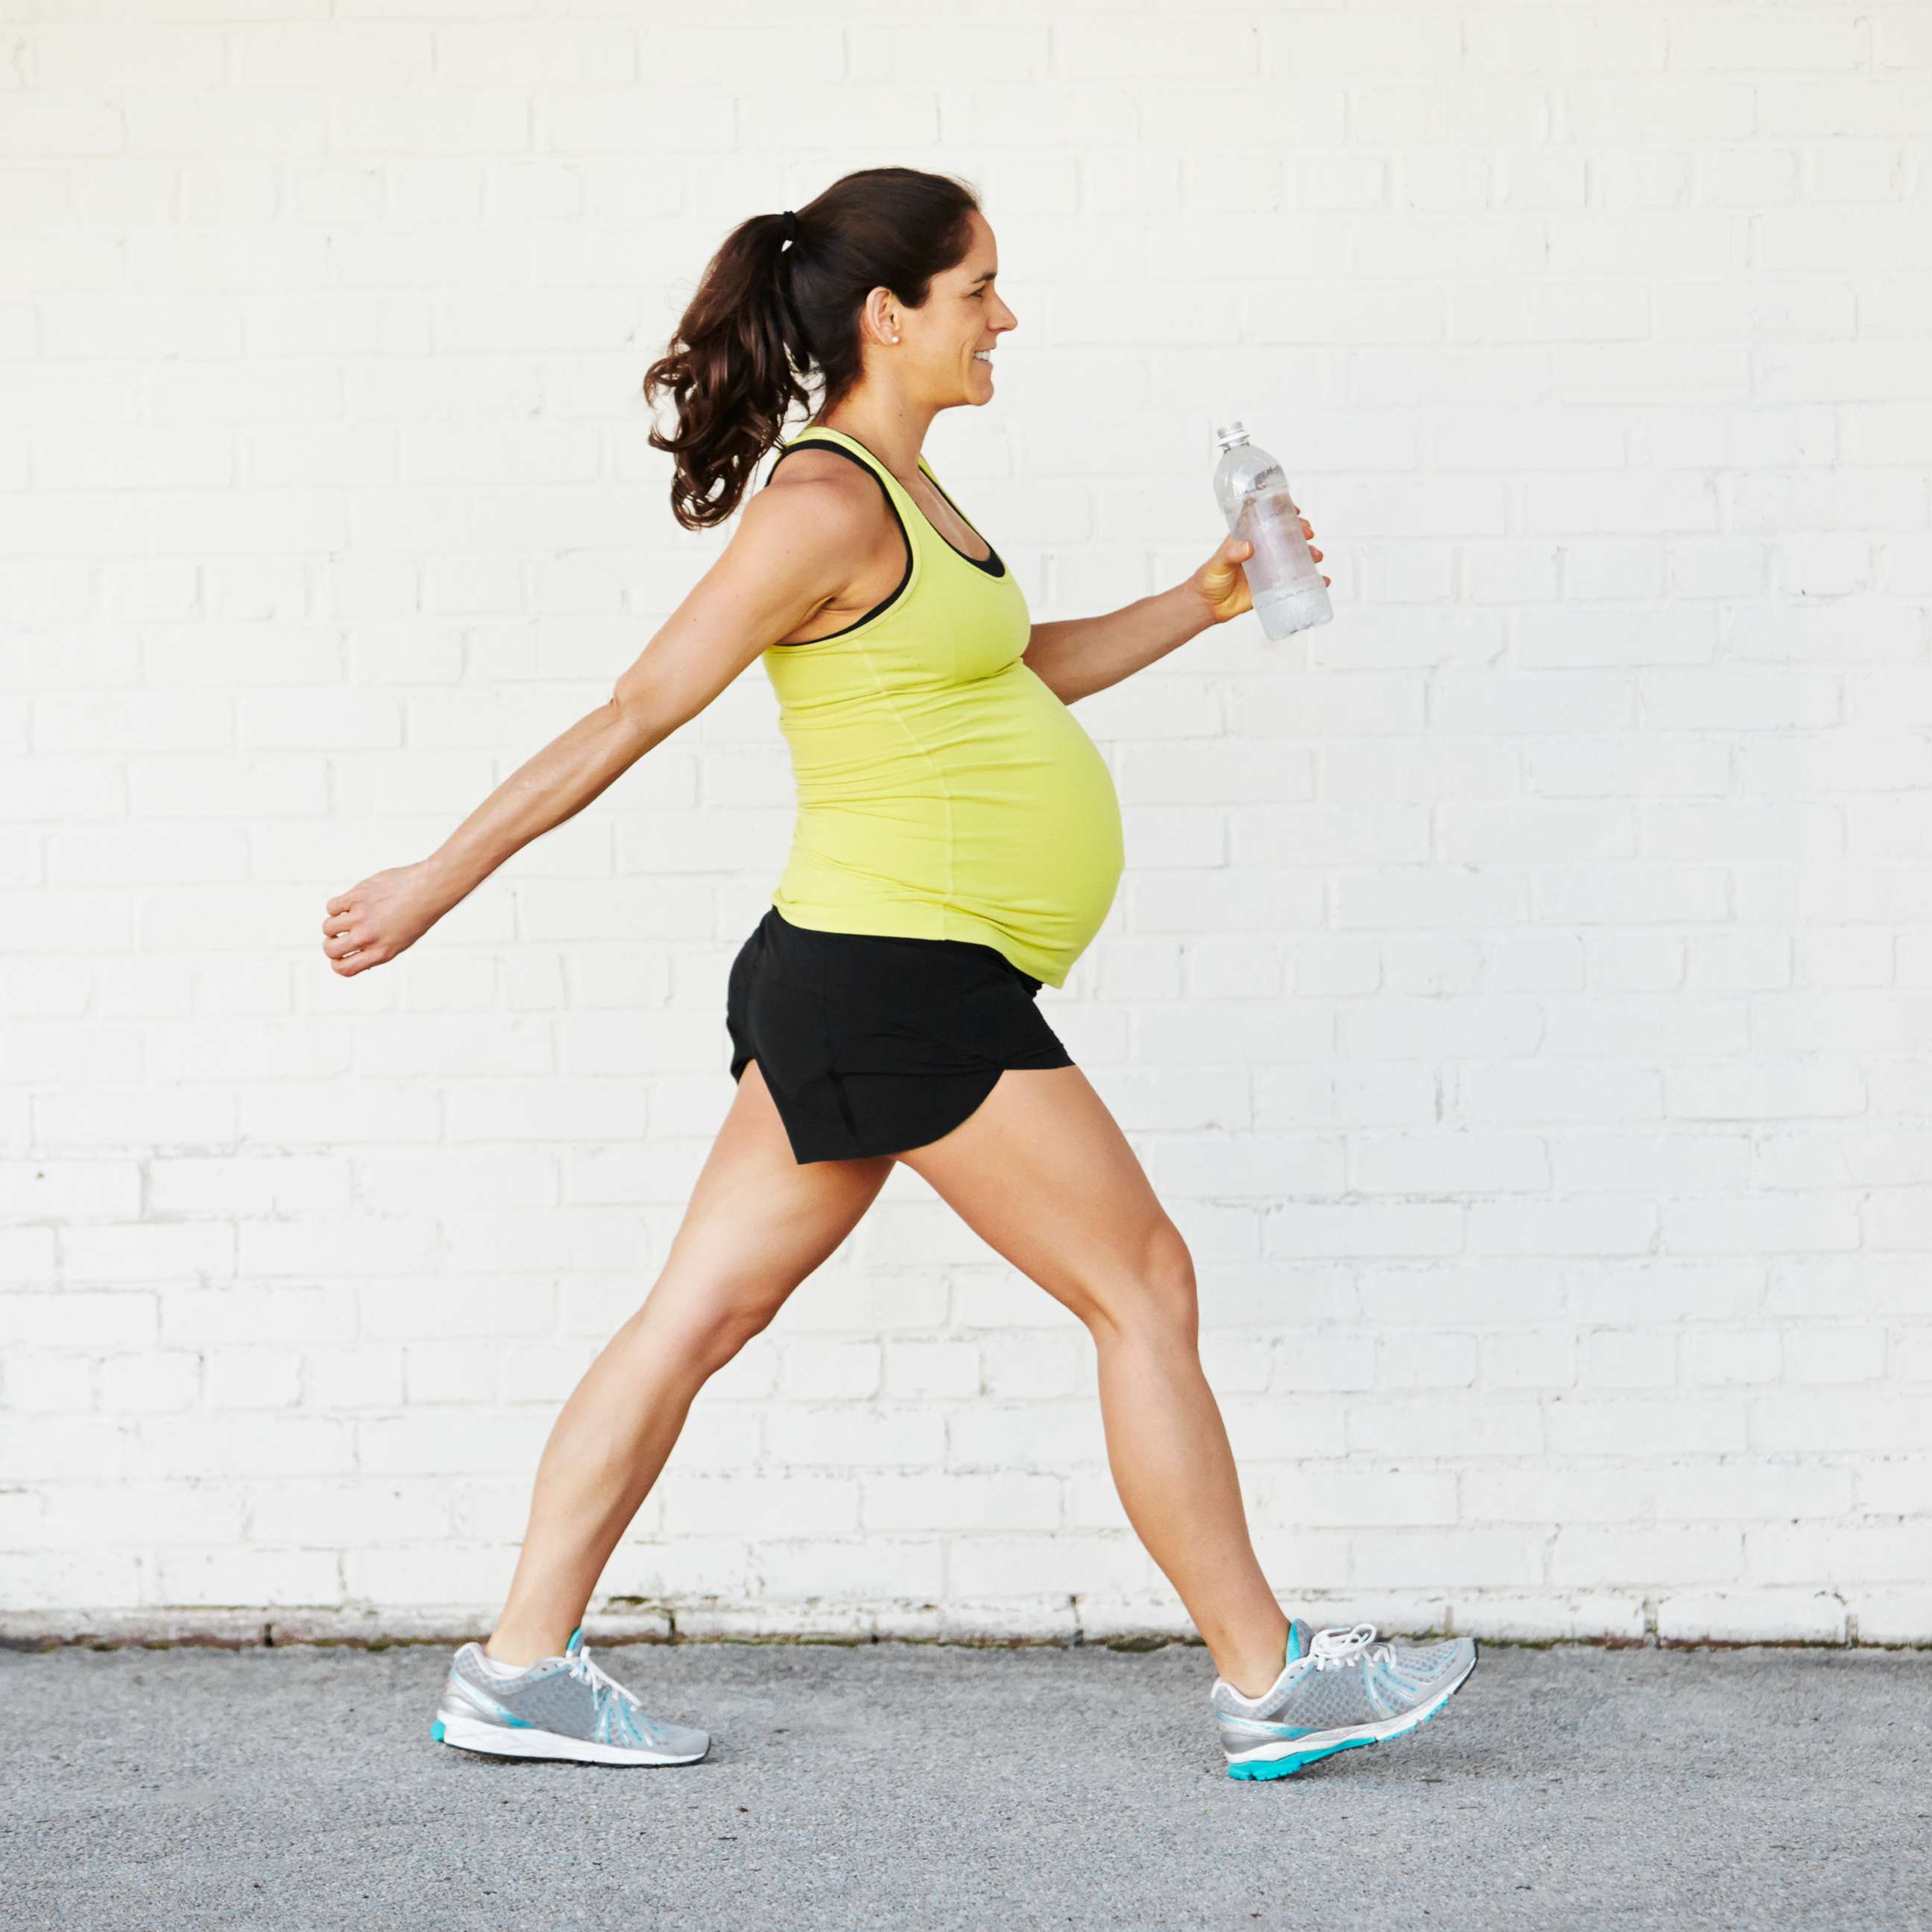 PHOTO: A pregnant woman exercises in this undated stock photo.